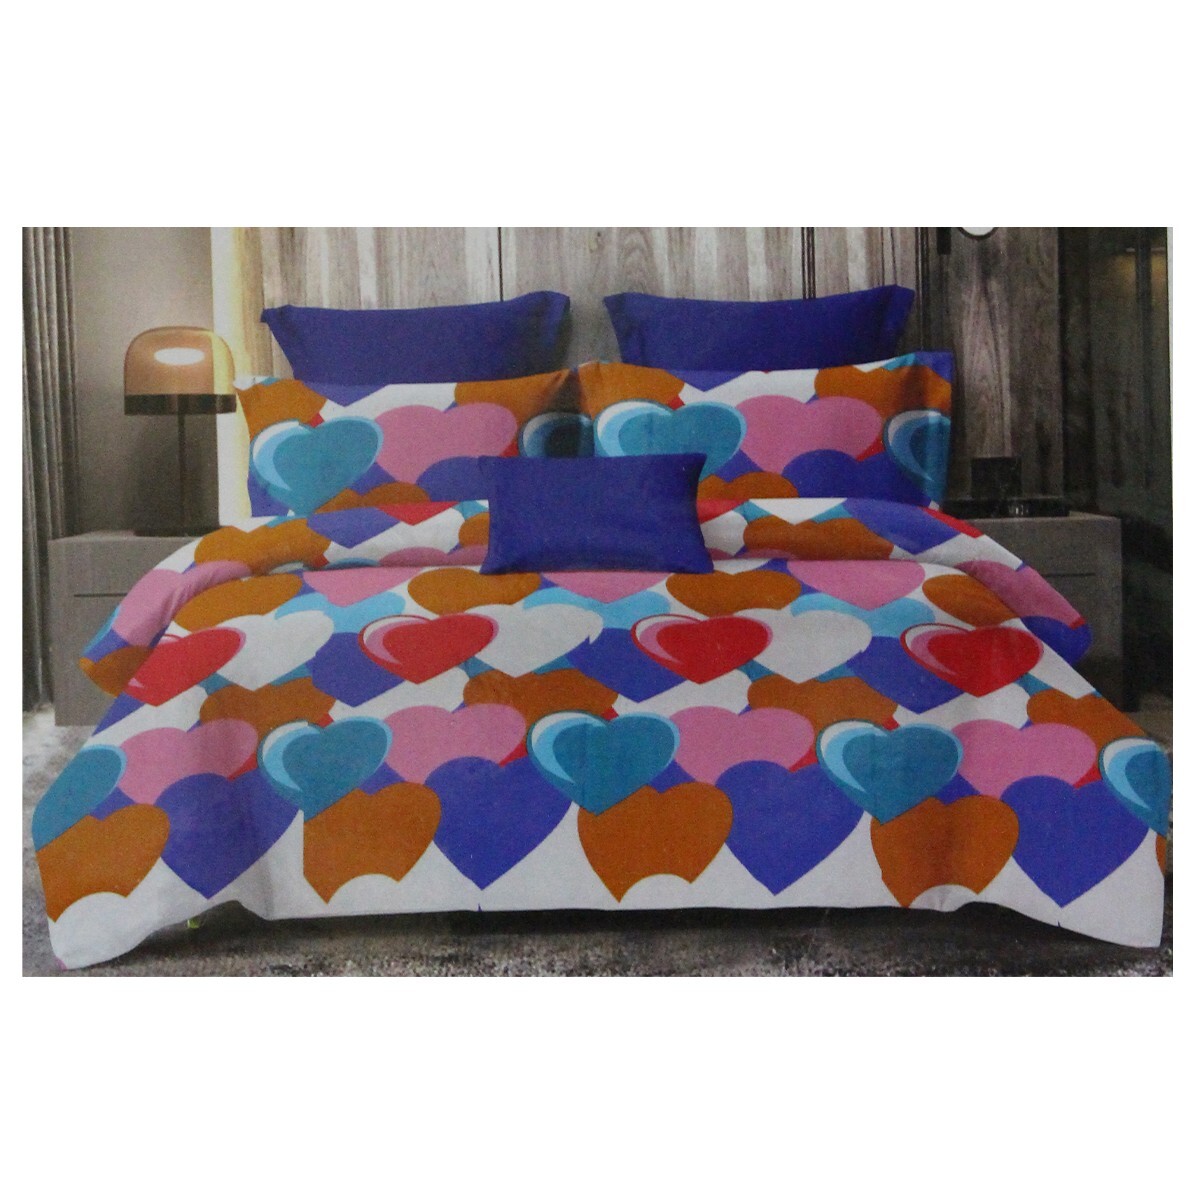 Home Well Queen Size Multicolour Bed Sheet , Set Of 3